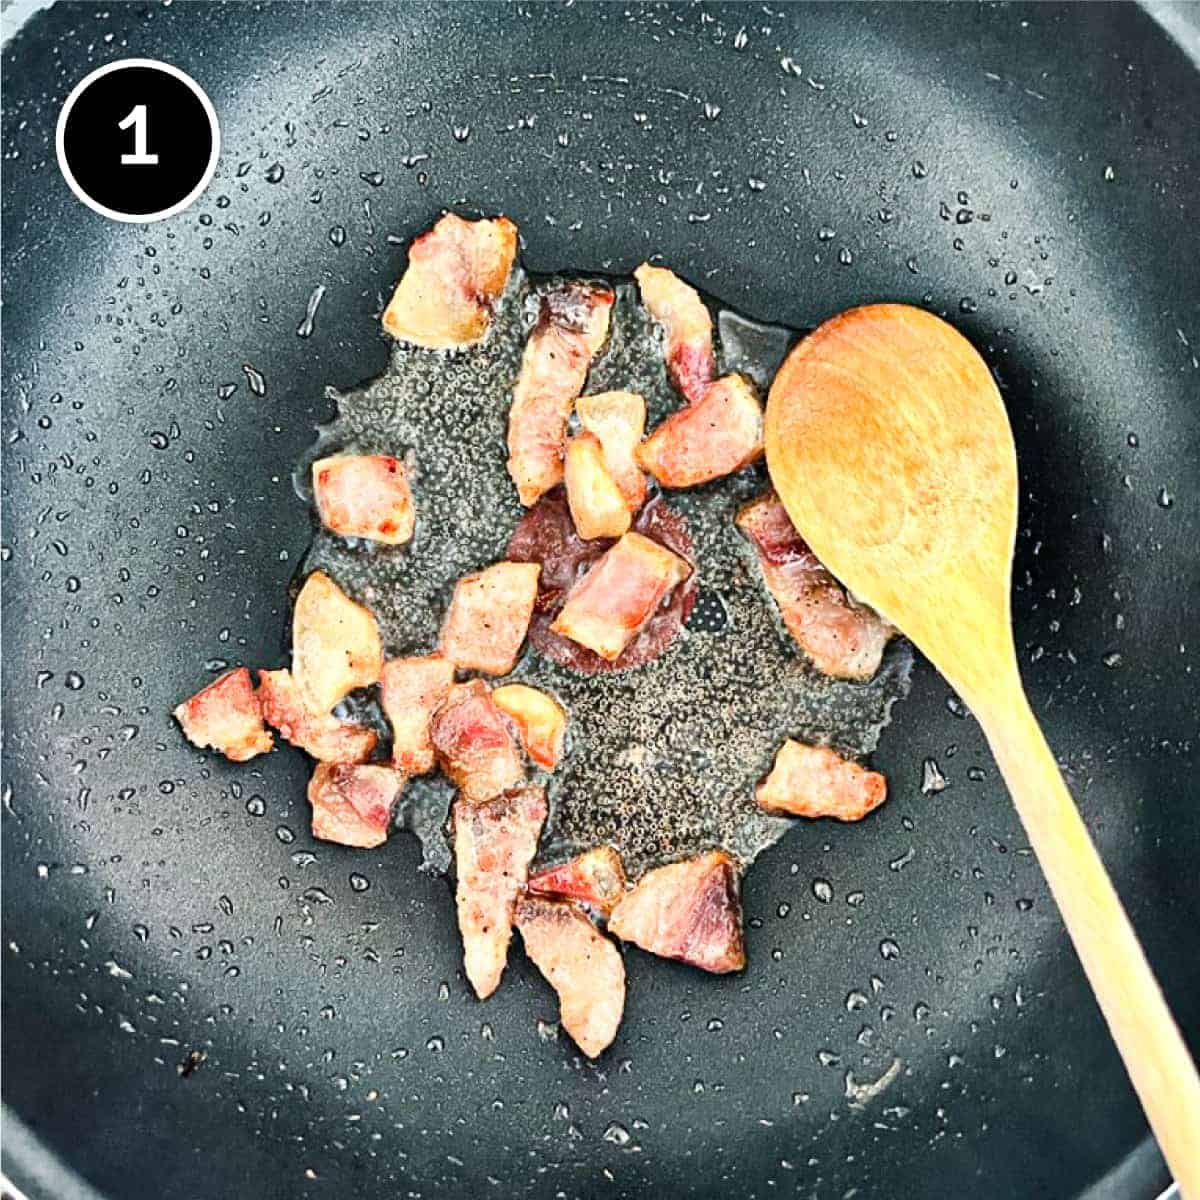 Guanciale bacon is fredde in a pan, rendering out its fat. A wooden spoon stirs.